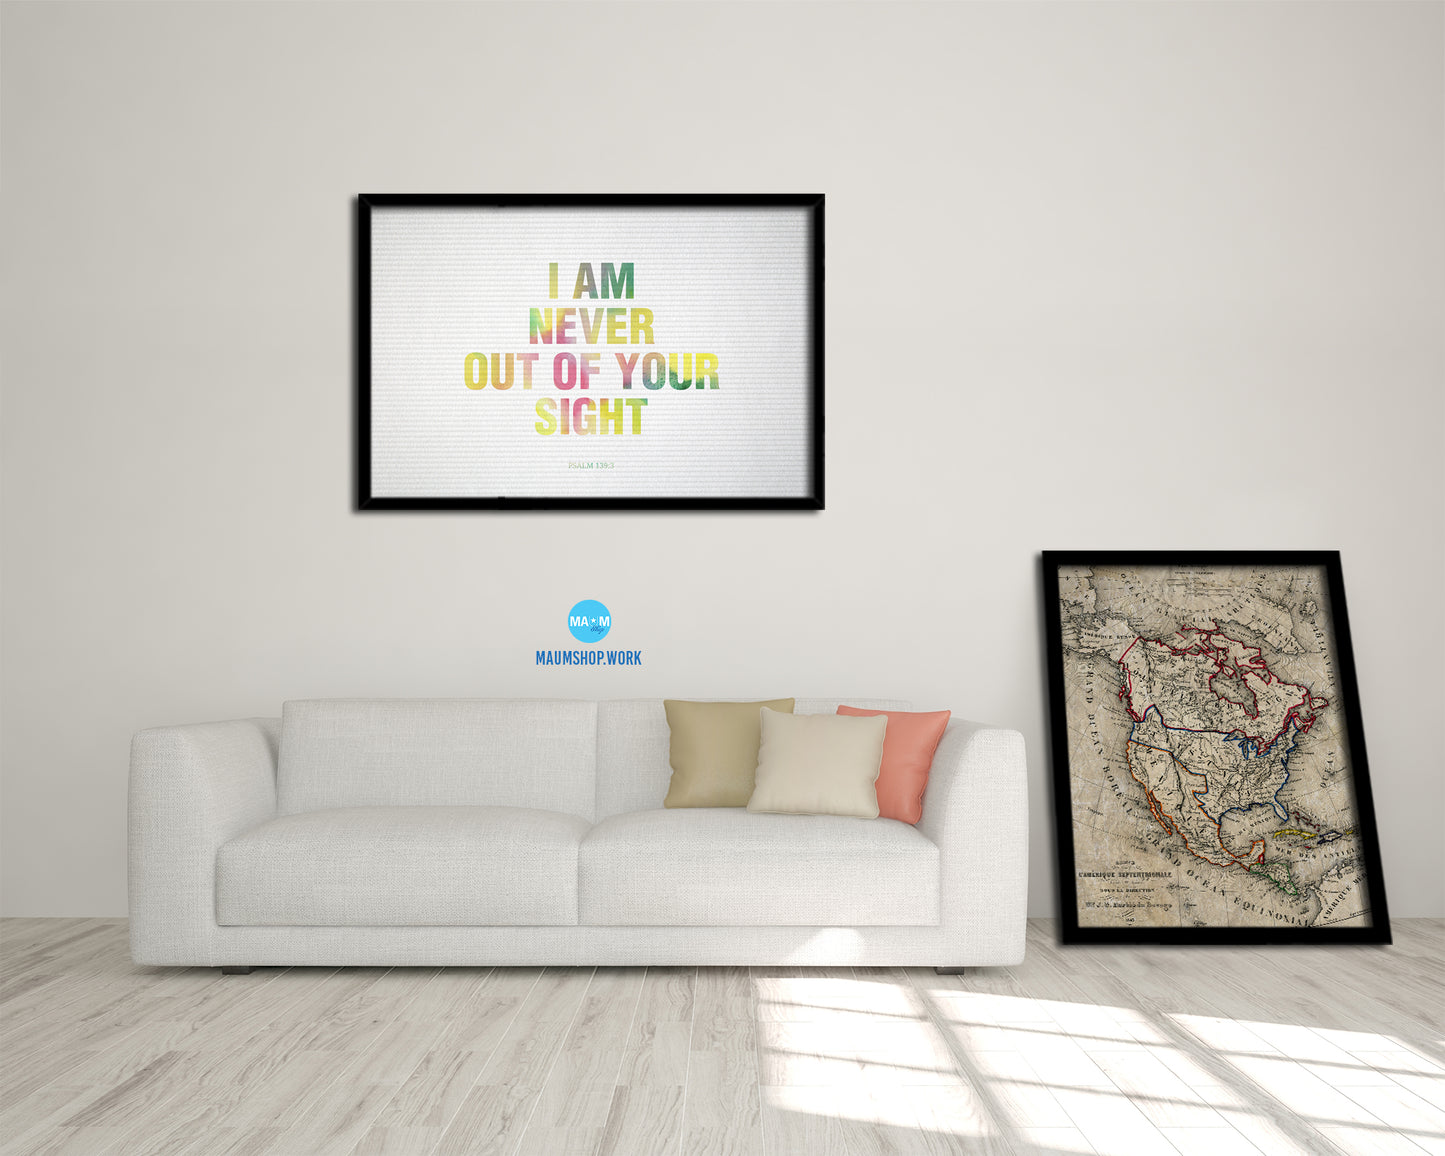 I am never out of your sight, Psalm 139:3 Bible Verse Scripture Framed Print Wall Decor Art Gifts